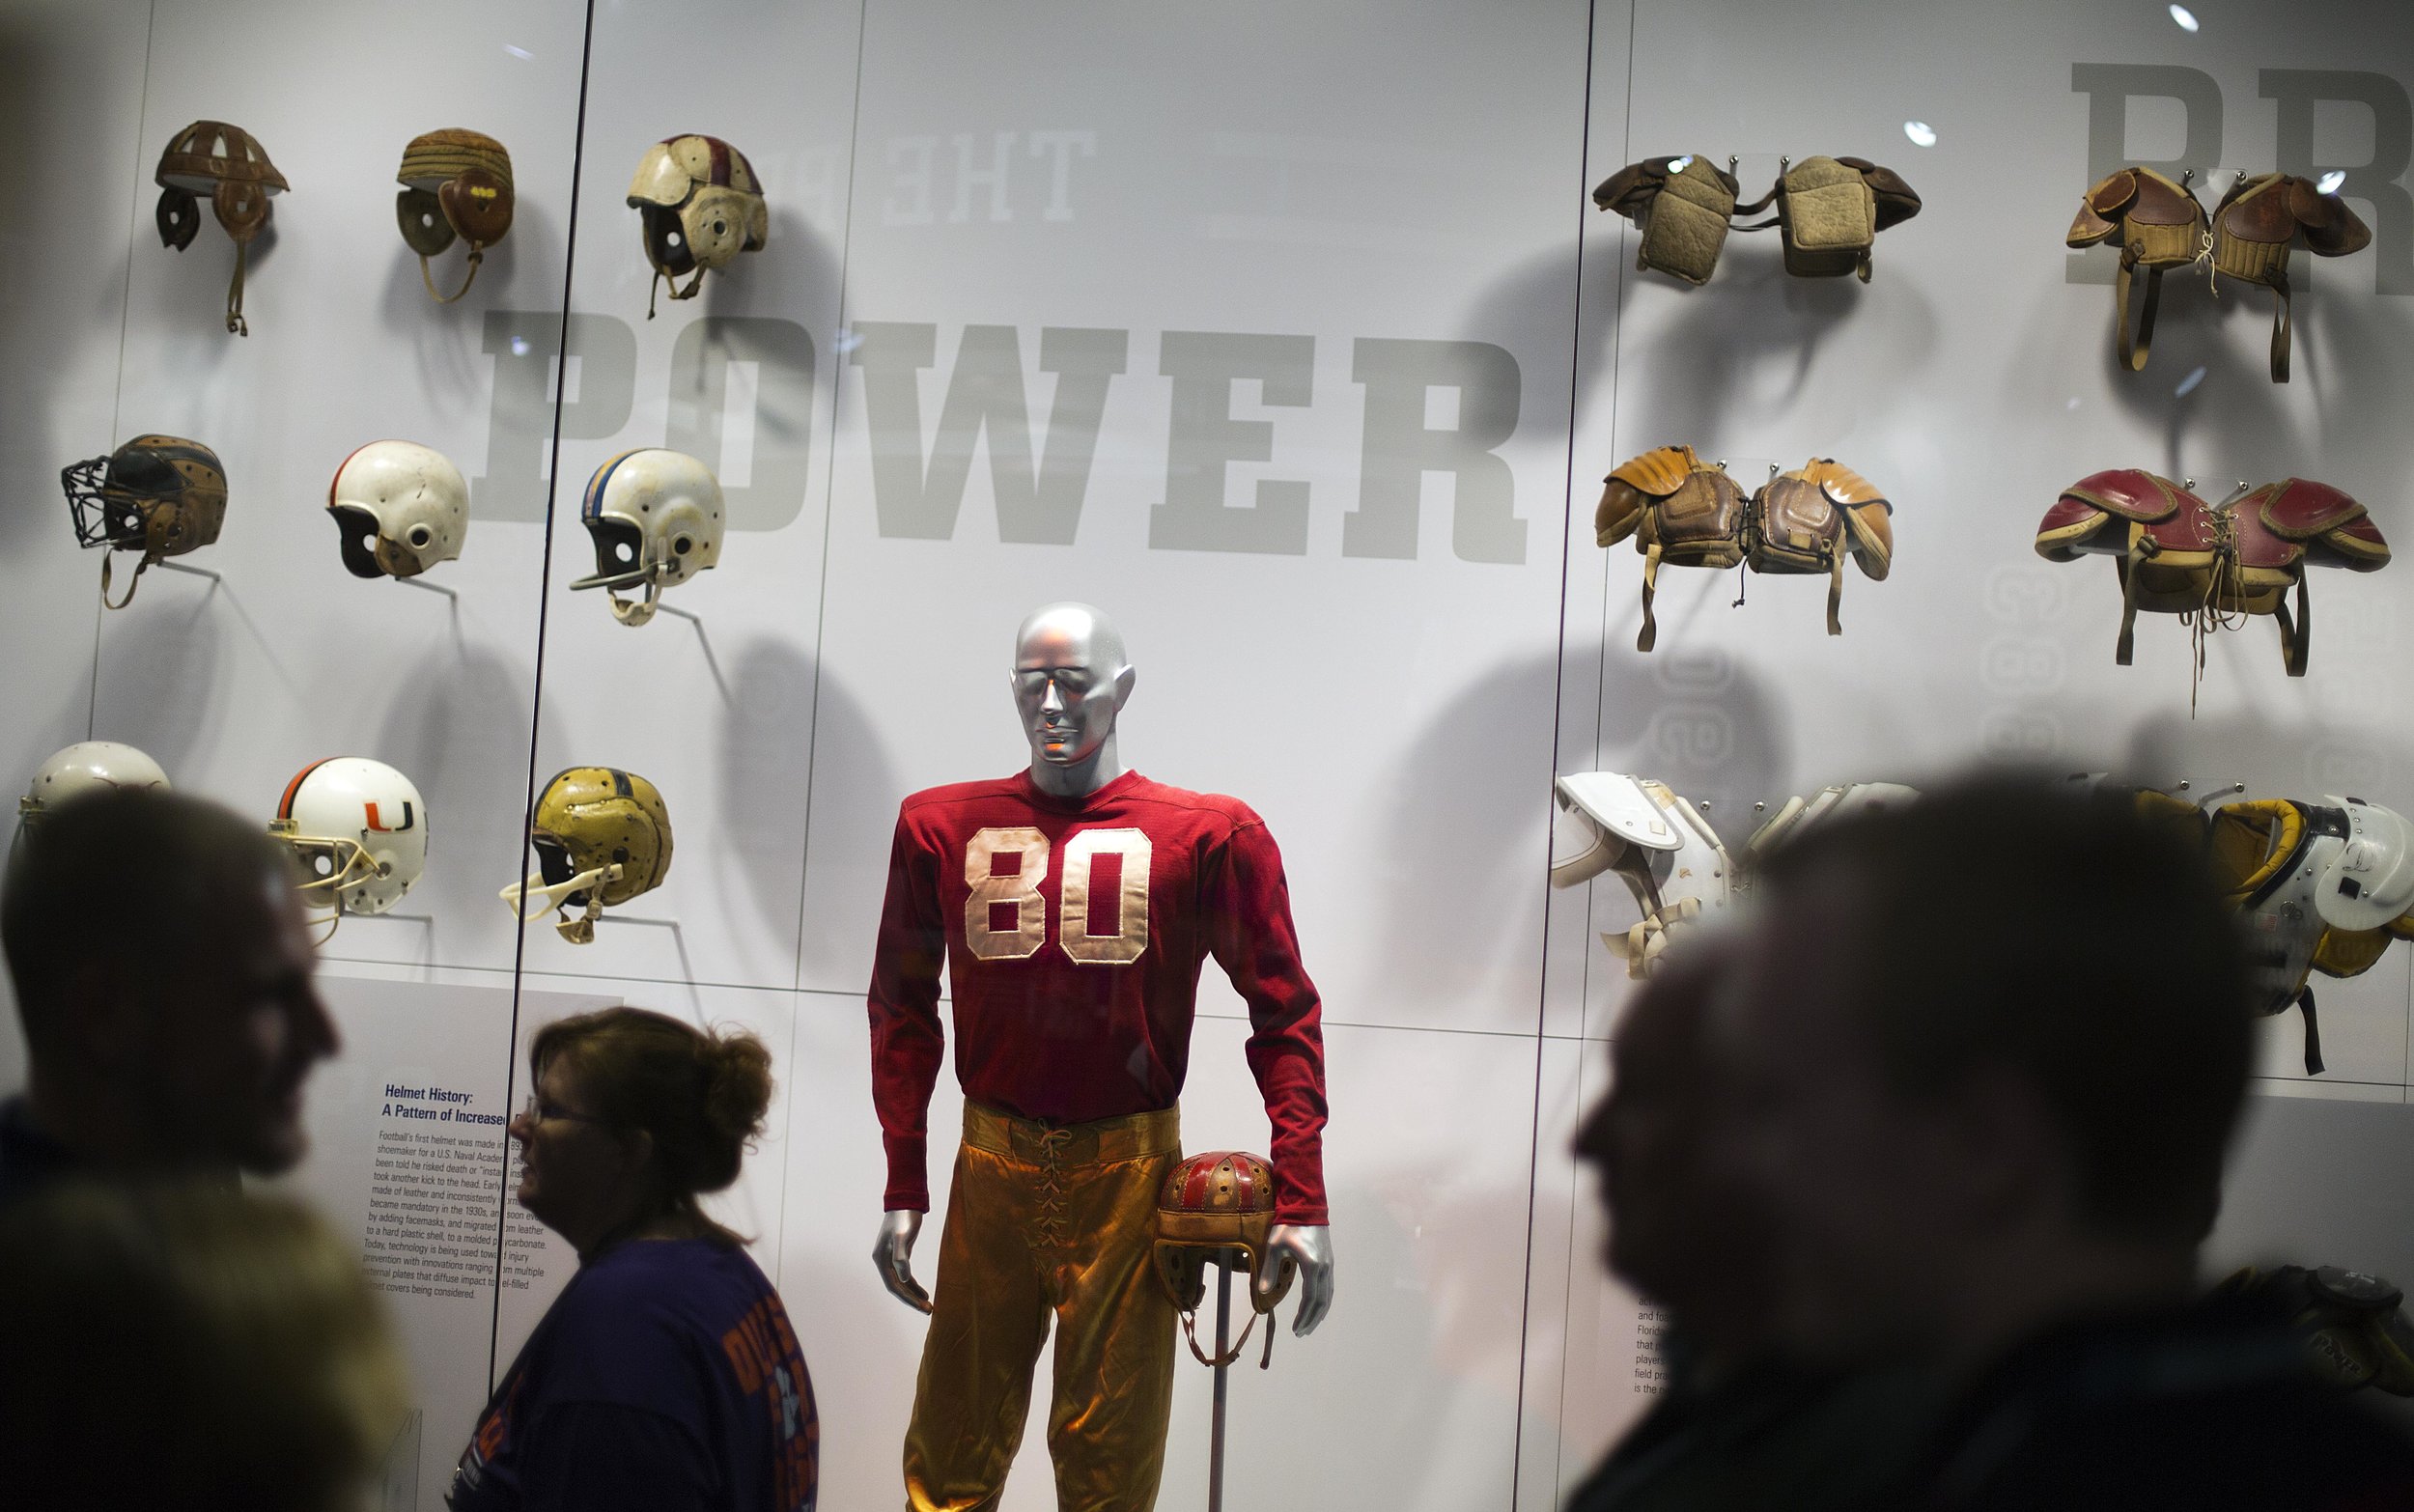  An exhibit displaying the evolution of protective equipment is viewed by visitors during a tour at the College Football Hall of Fame, Wednesday, Aug. 13, 2014, in Atlanta. One hundred contest winners who wrote an essay detailing their love of colleg